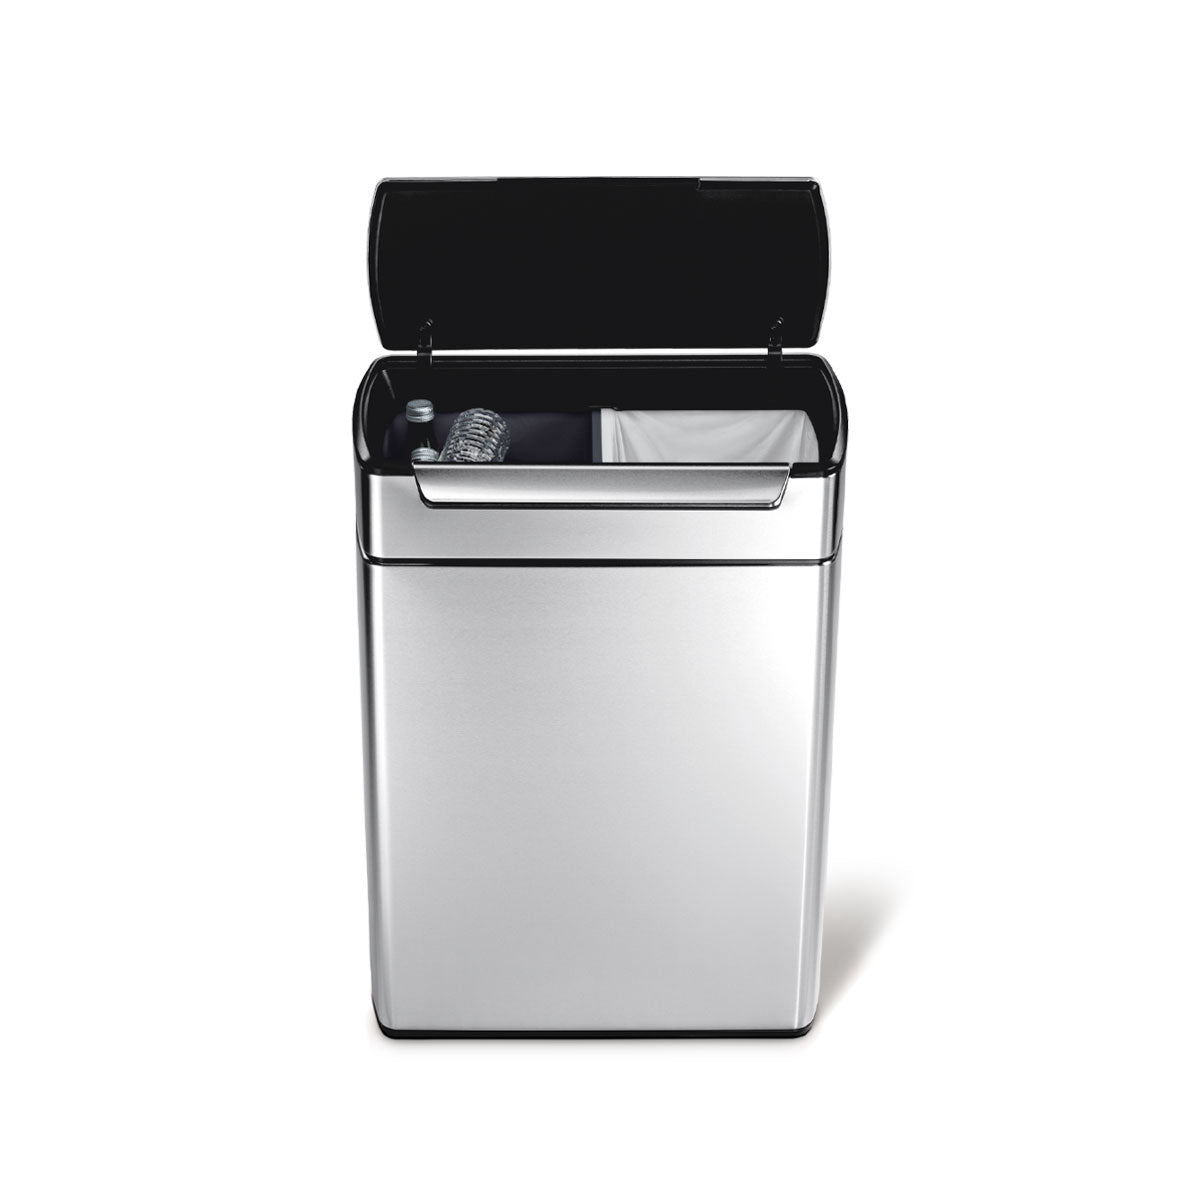 simplehuman Rectangular Hands-Free Kitchen Step Trash Can with